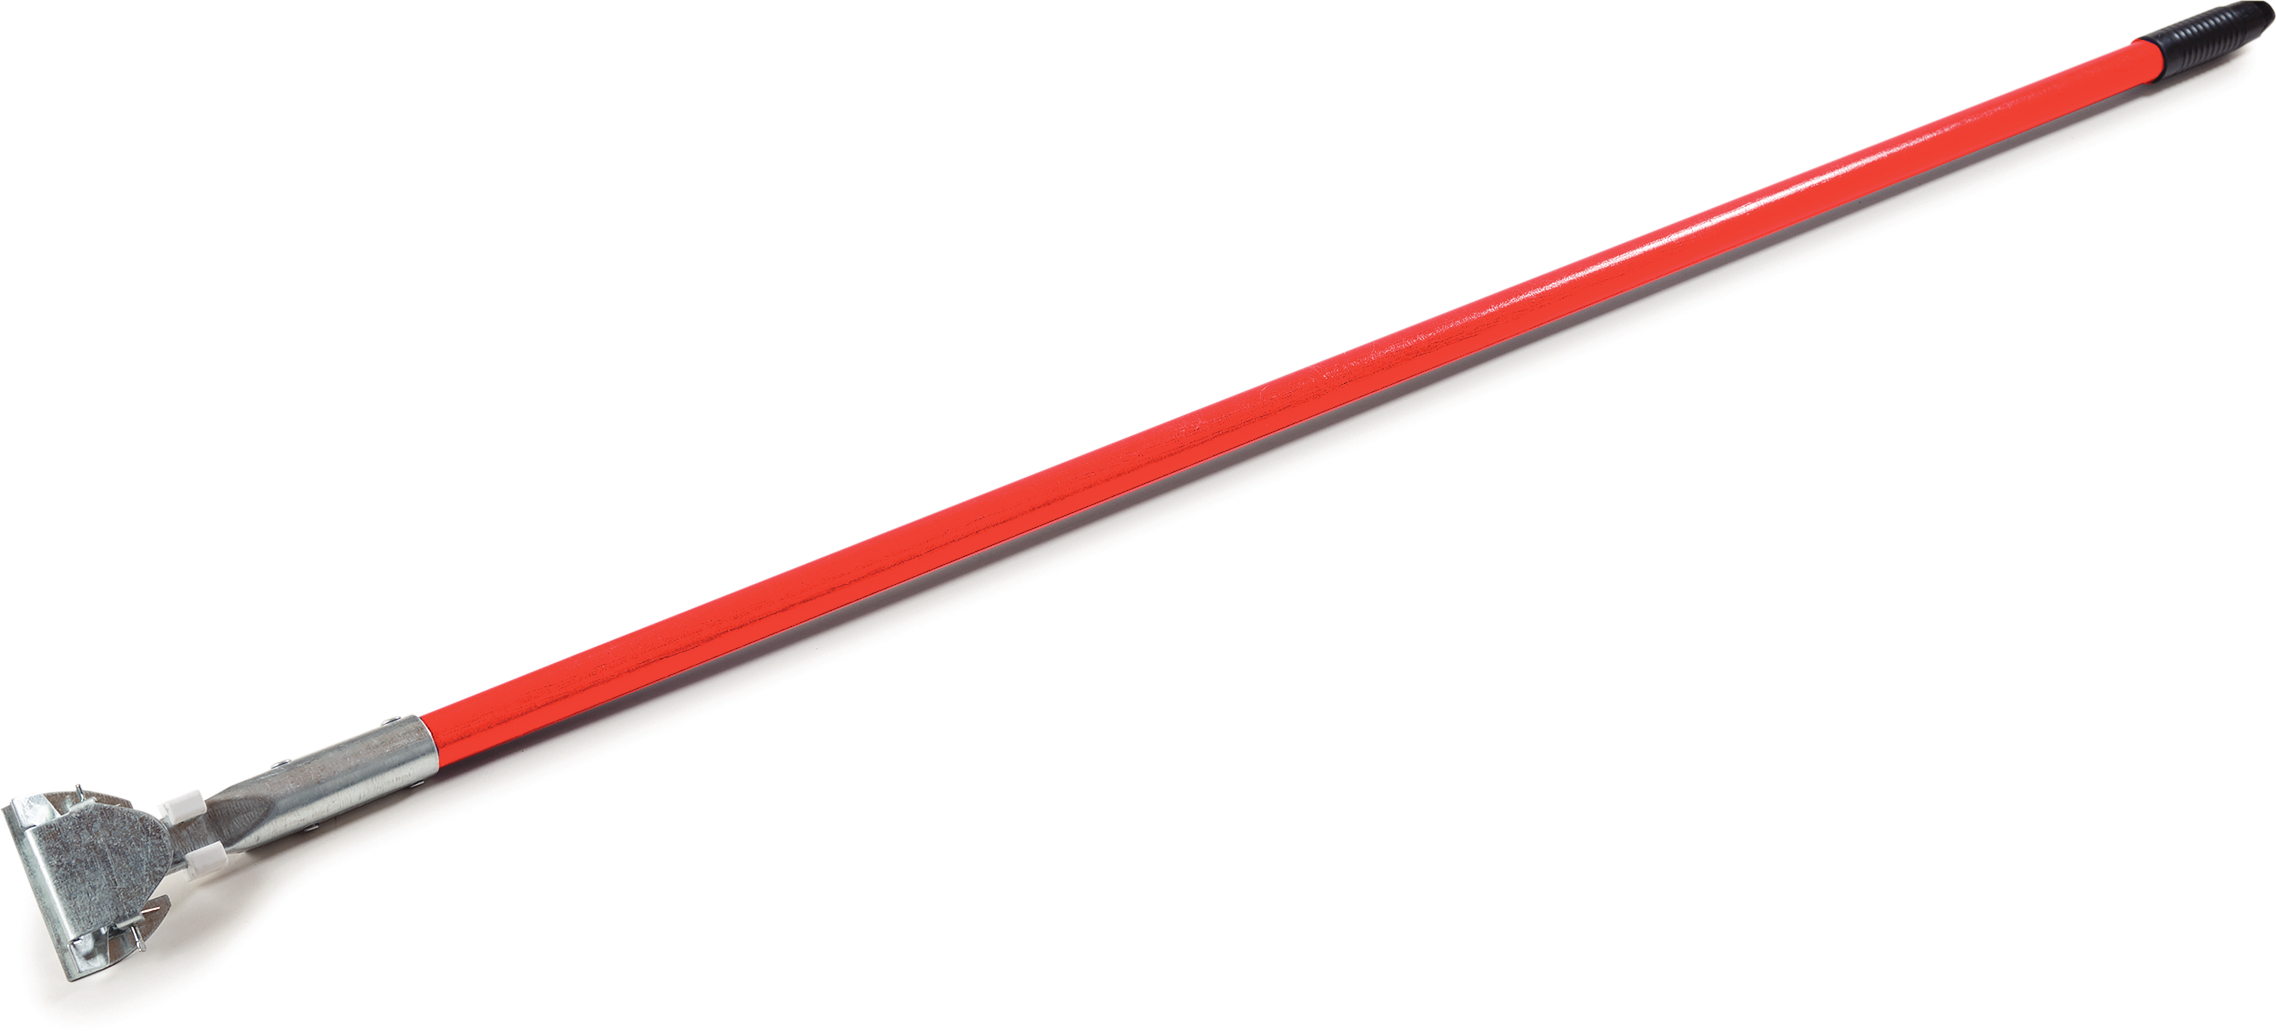 Fiberglass Dust Mop Handle with Clip-On Connector 60 - Red